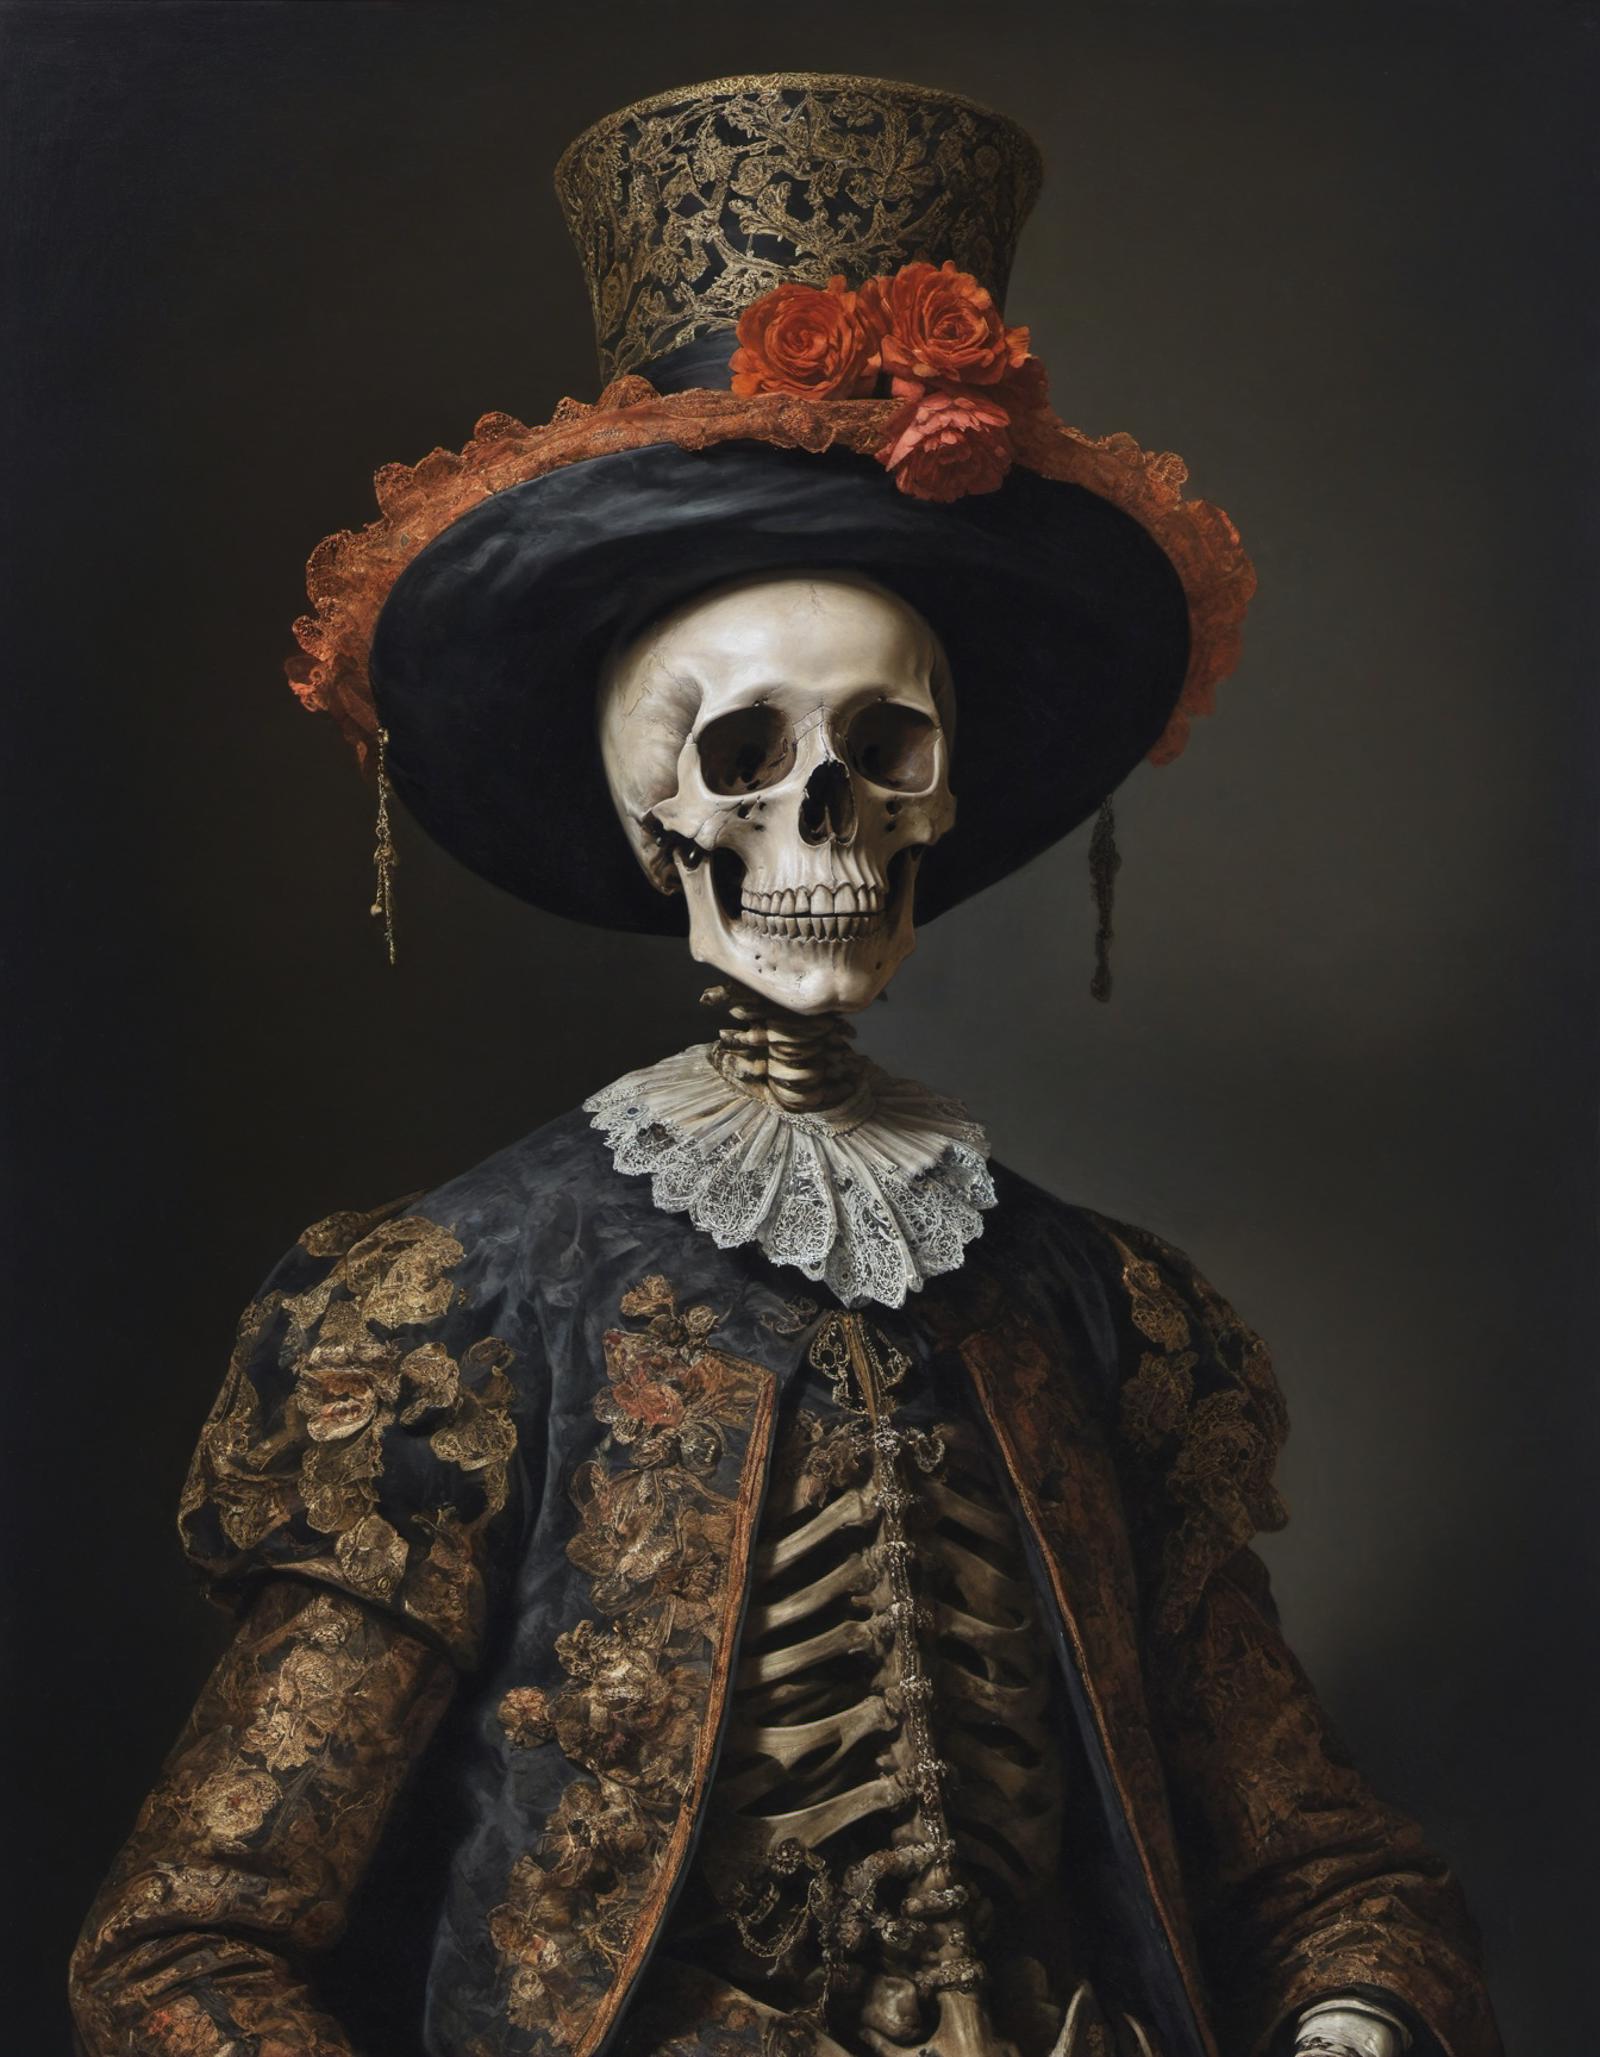 A skeleton wearing a top hat and a lace dress.